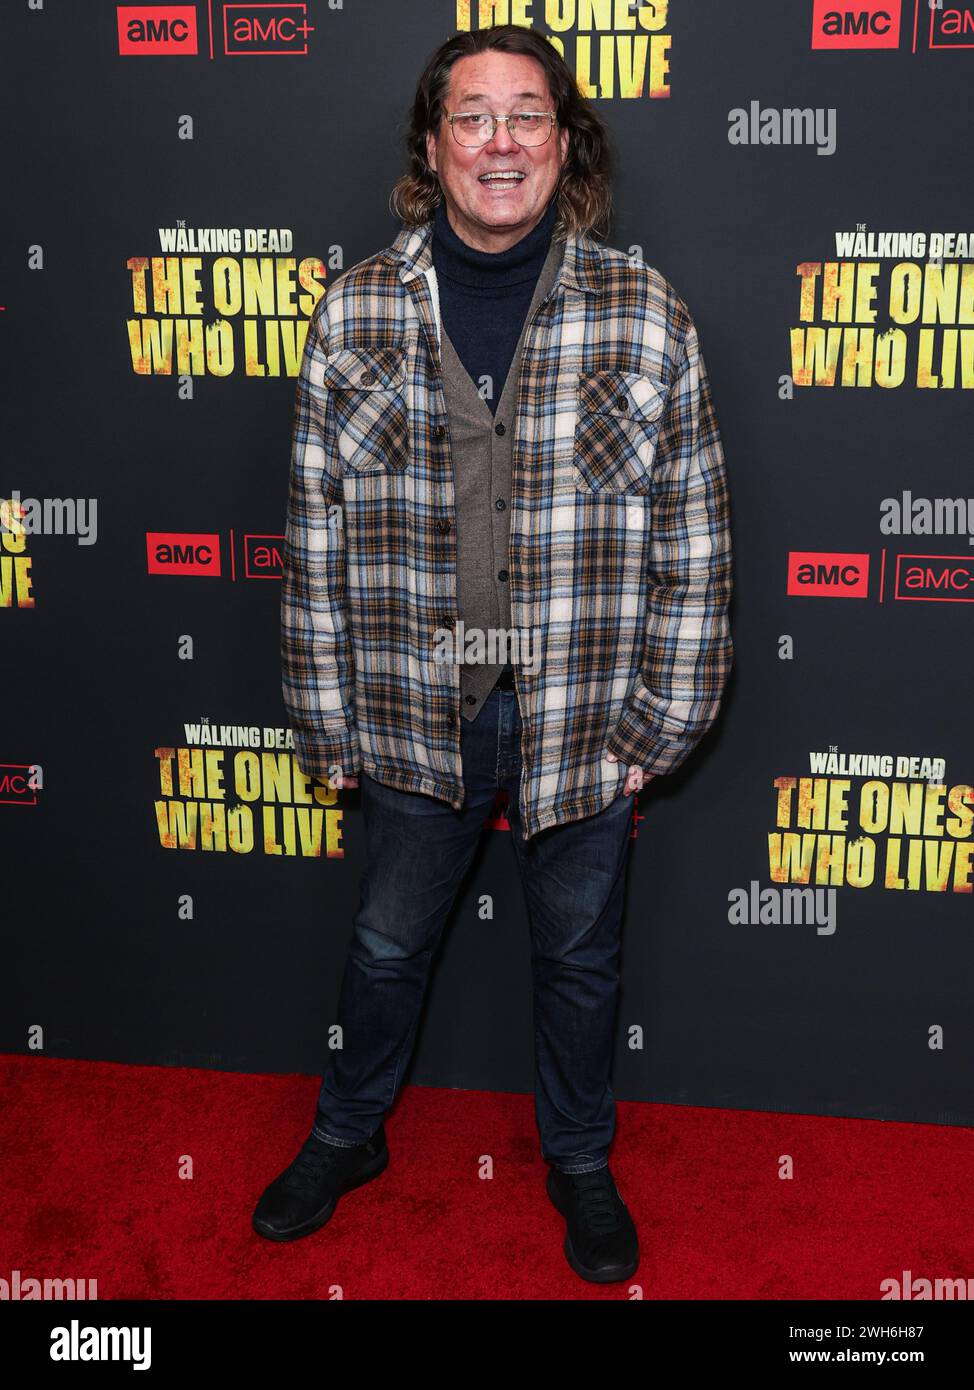 HOLLYWOOD, LOS ANGELES, KALIFORNIEN, USA - FEBRUAR 07: Doug Benson kommt zur Los Angeles Premiere von AMC+'s The Walking Dead: the Ones Who Live' Staffel 1 fand am 7. Februar 2024 im Linwood Dunn Theater im Pickford Center for Motion Picture Study in Hollywood, Los Angeles, Kalifornien, USA statt. (Foto: Xavier Collin/Image Press Agency) Stockfoto